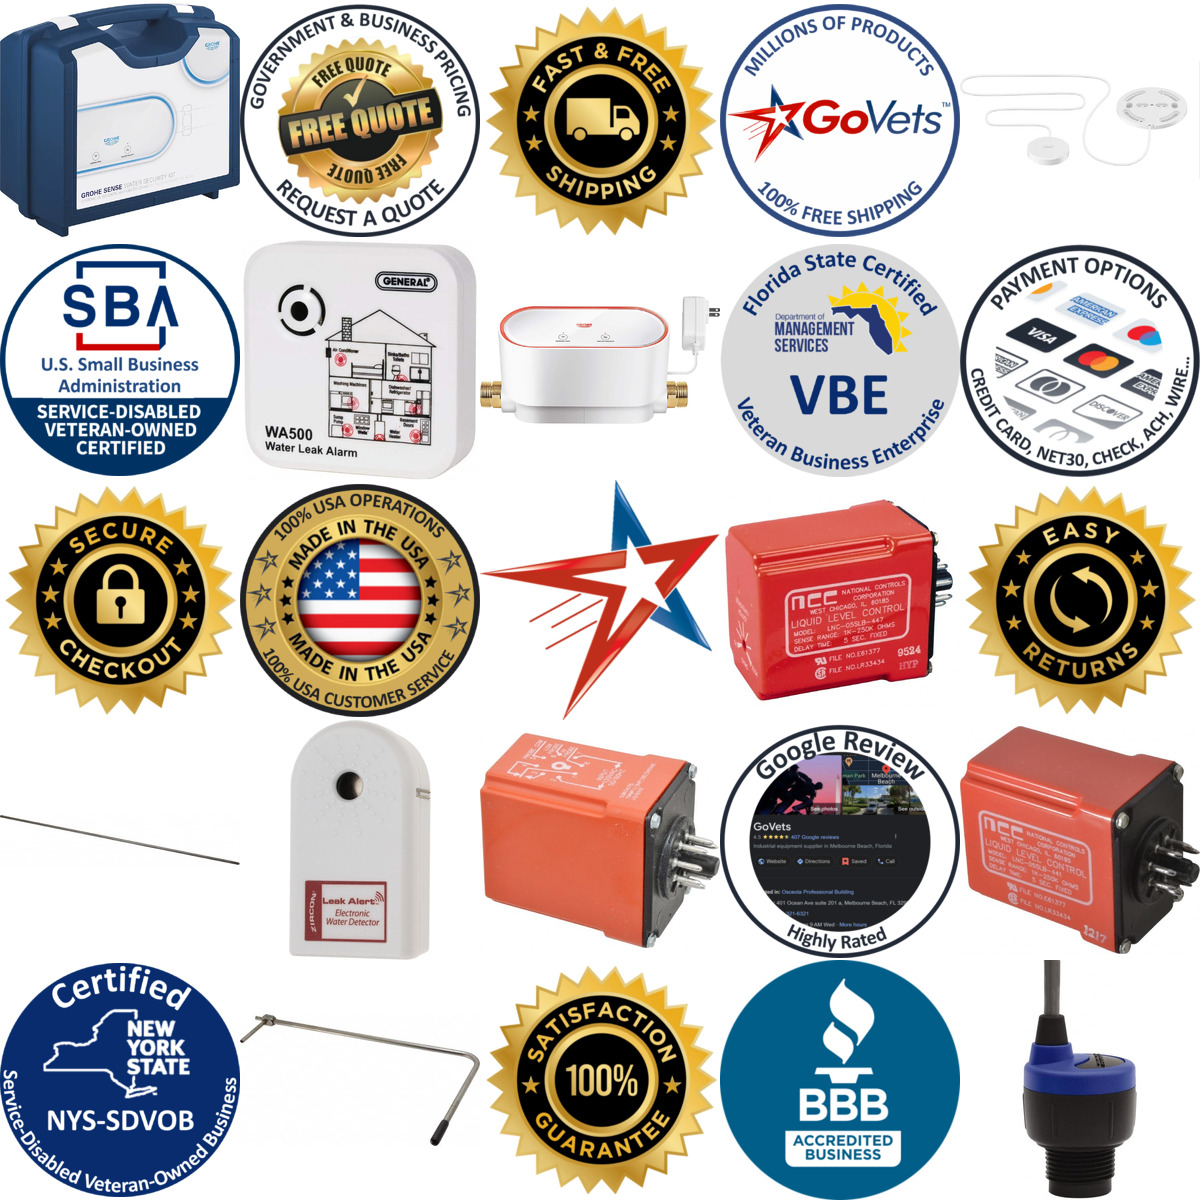 A selection of Liquid Level Sensors and Probes products on GoVets